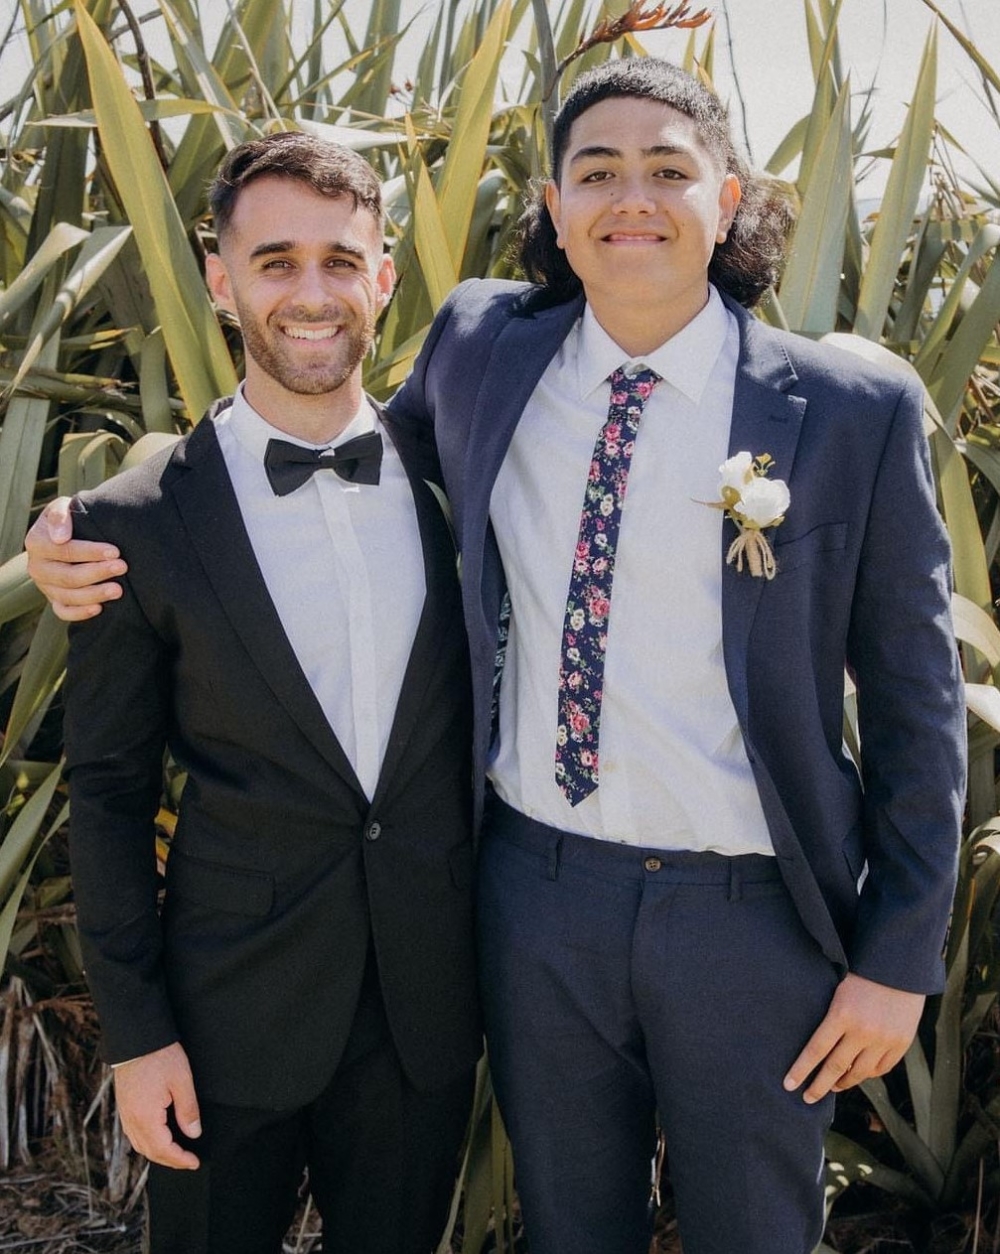 A man and a boy in formal suits hugging and smiling happily